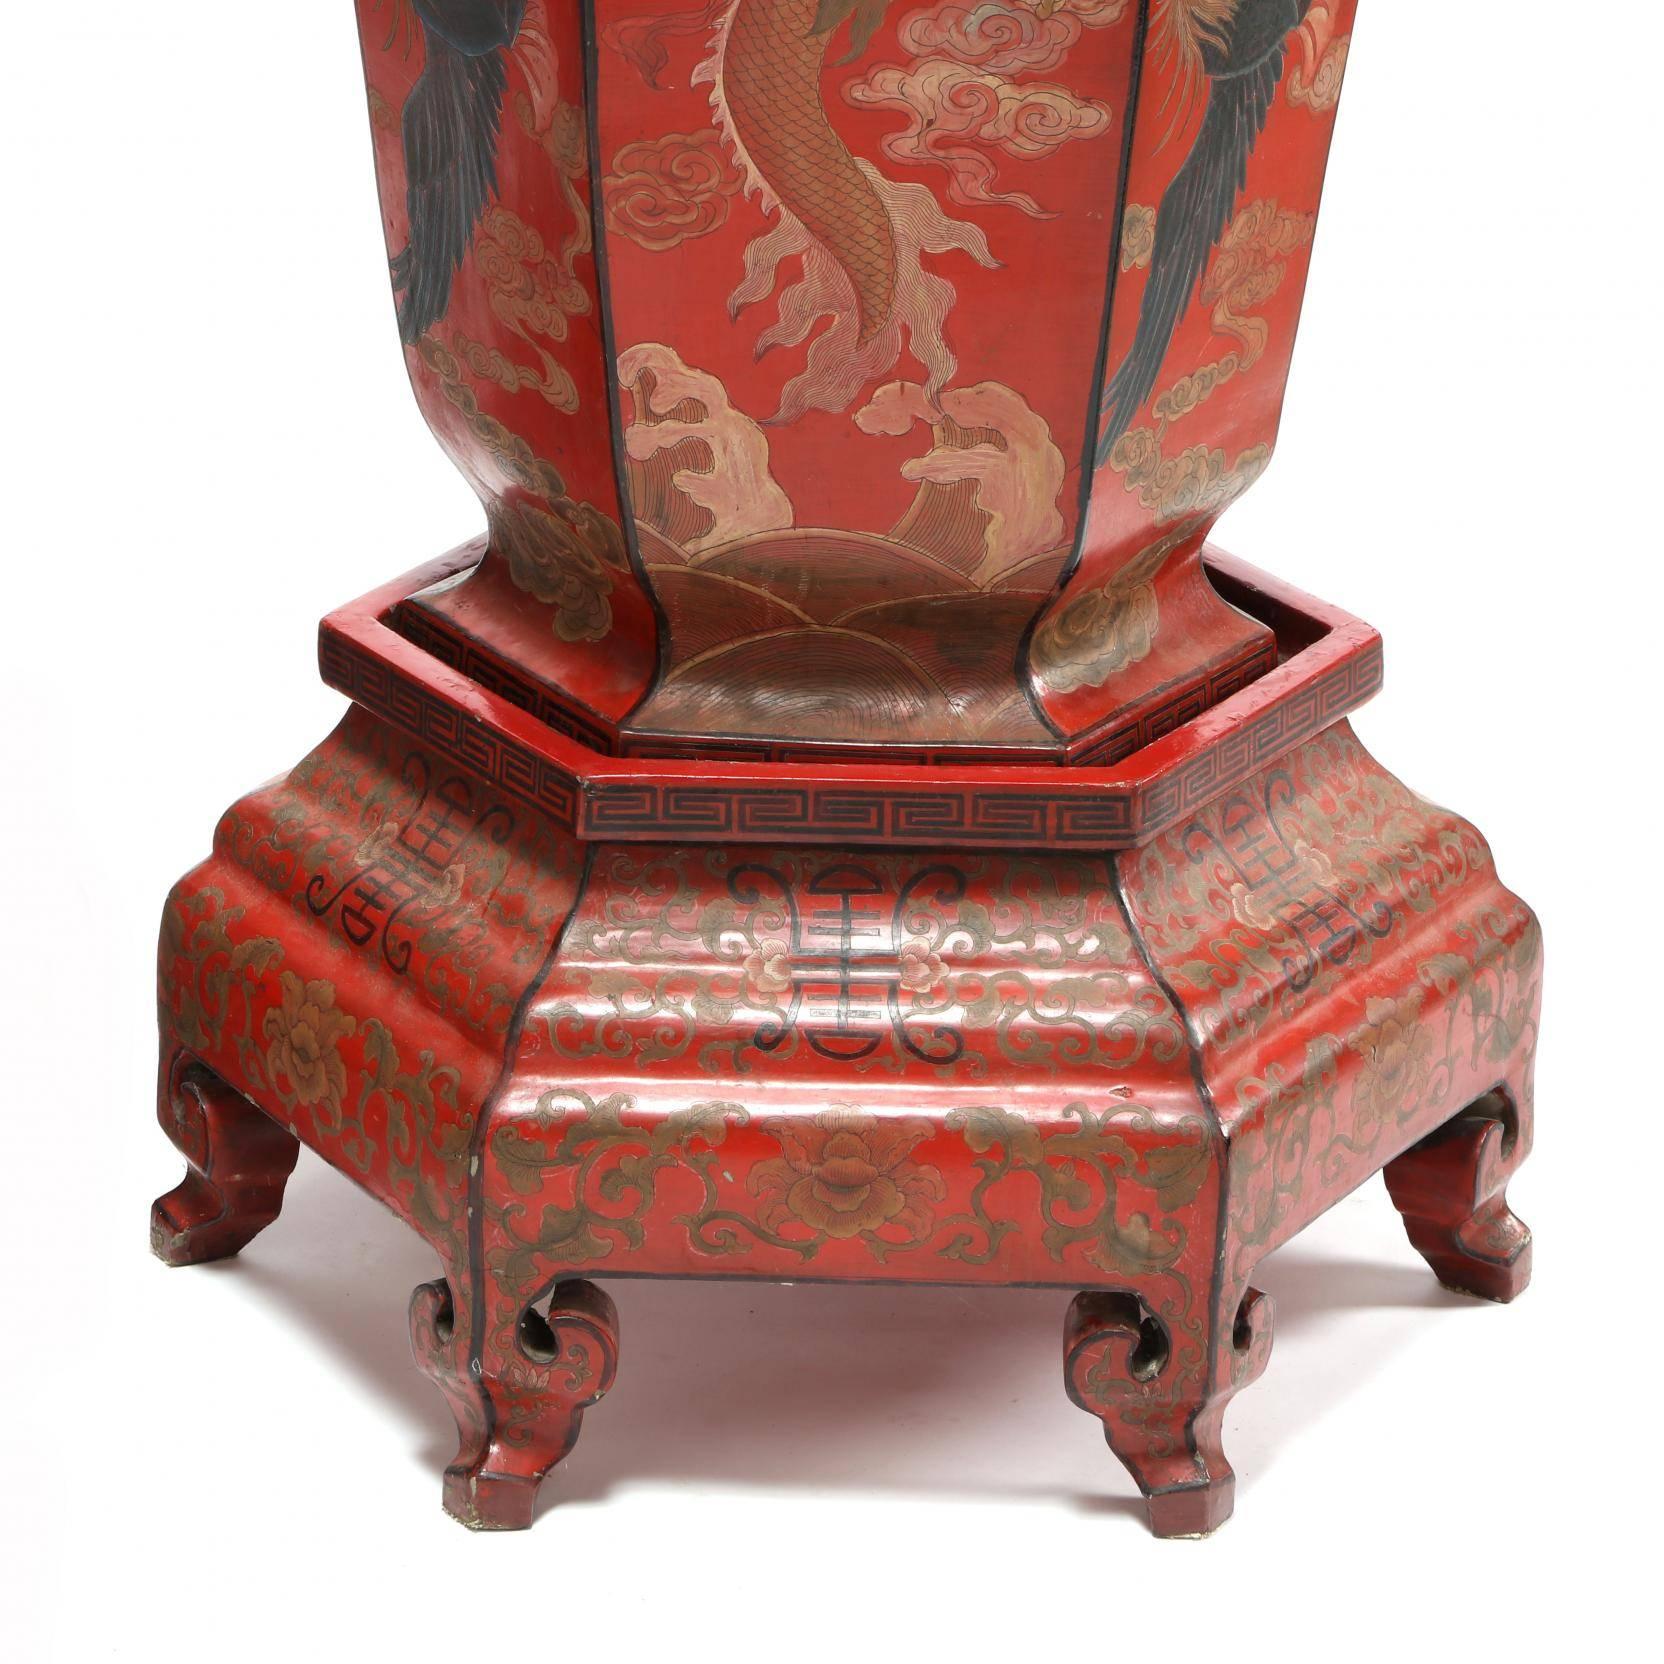 Large pair of Chinese red lacquer imperial vases with painted dragon on stands.

Qing dynasty (1644-1912), 19th century, exceptionally large pair of Chinese palace or imperial vases, hexagonal sided vases with alternating panels that feature